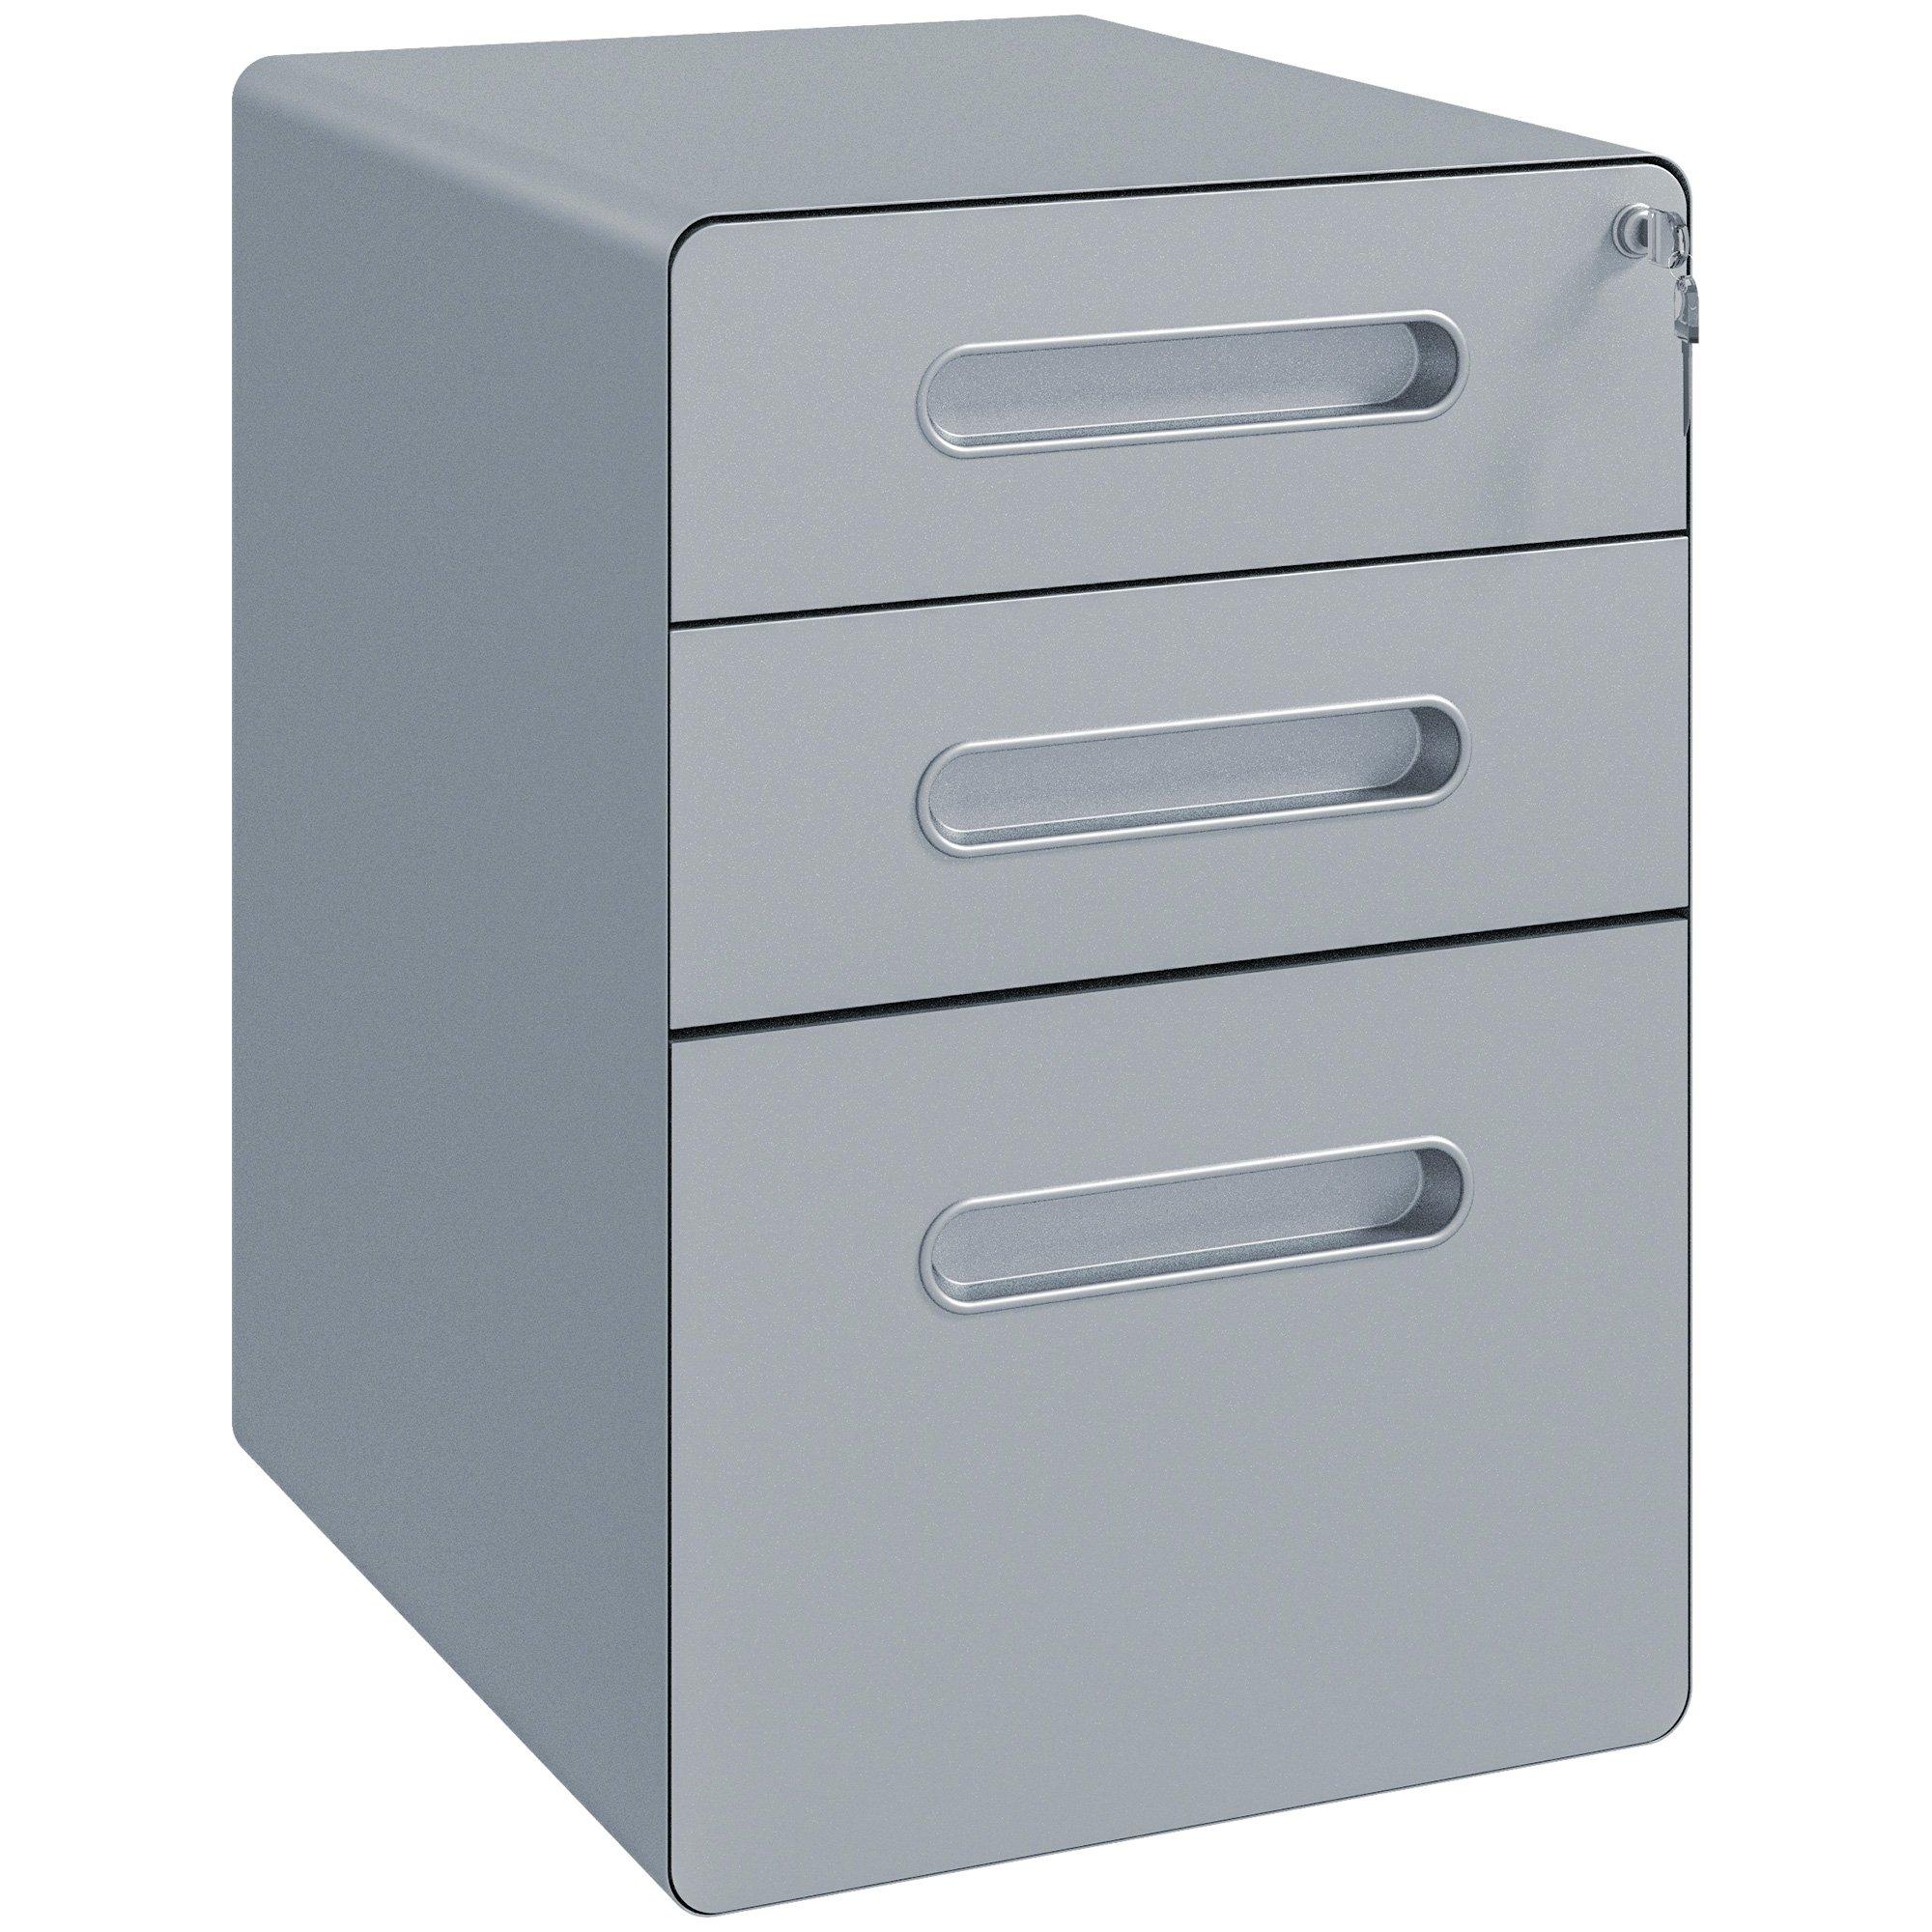 3 Drawer Steel Filing Cabinet with 4 Wheels Lock Pencil Box Office